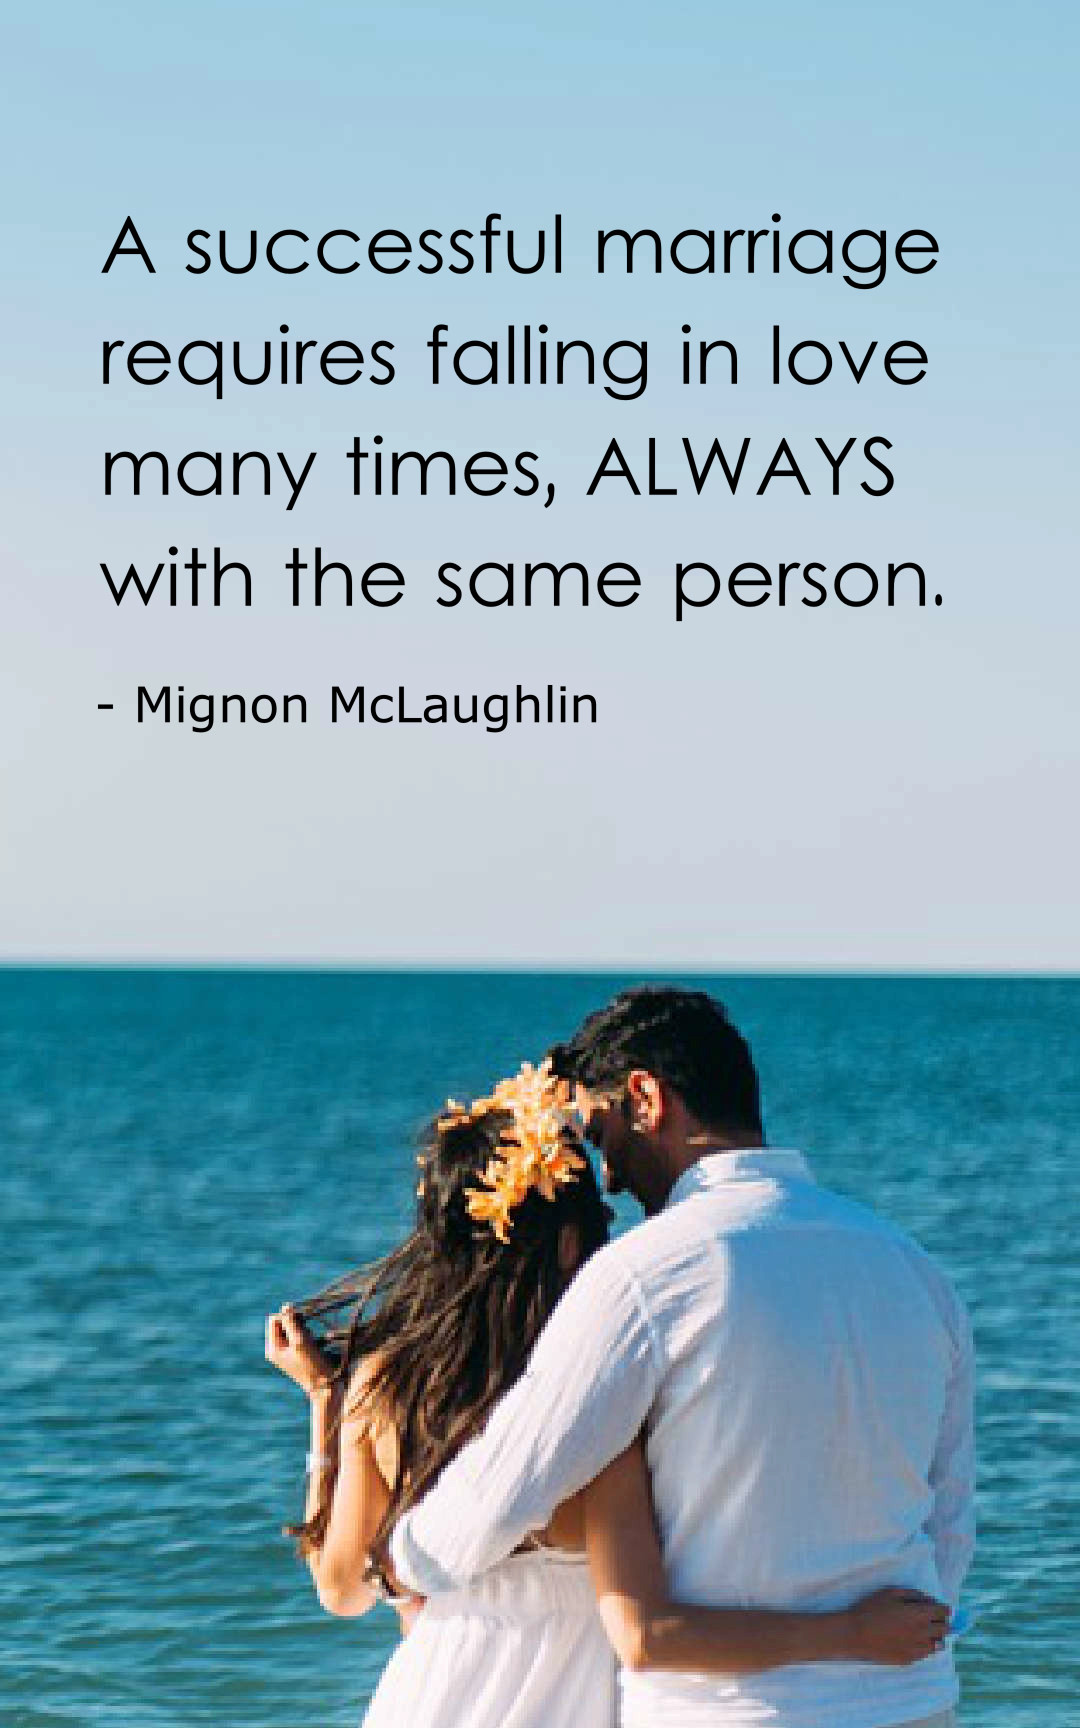 Marriage Pic Quotes
 45 Inspirational Marriage Quotes And Sayings With